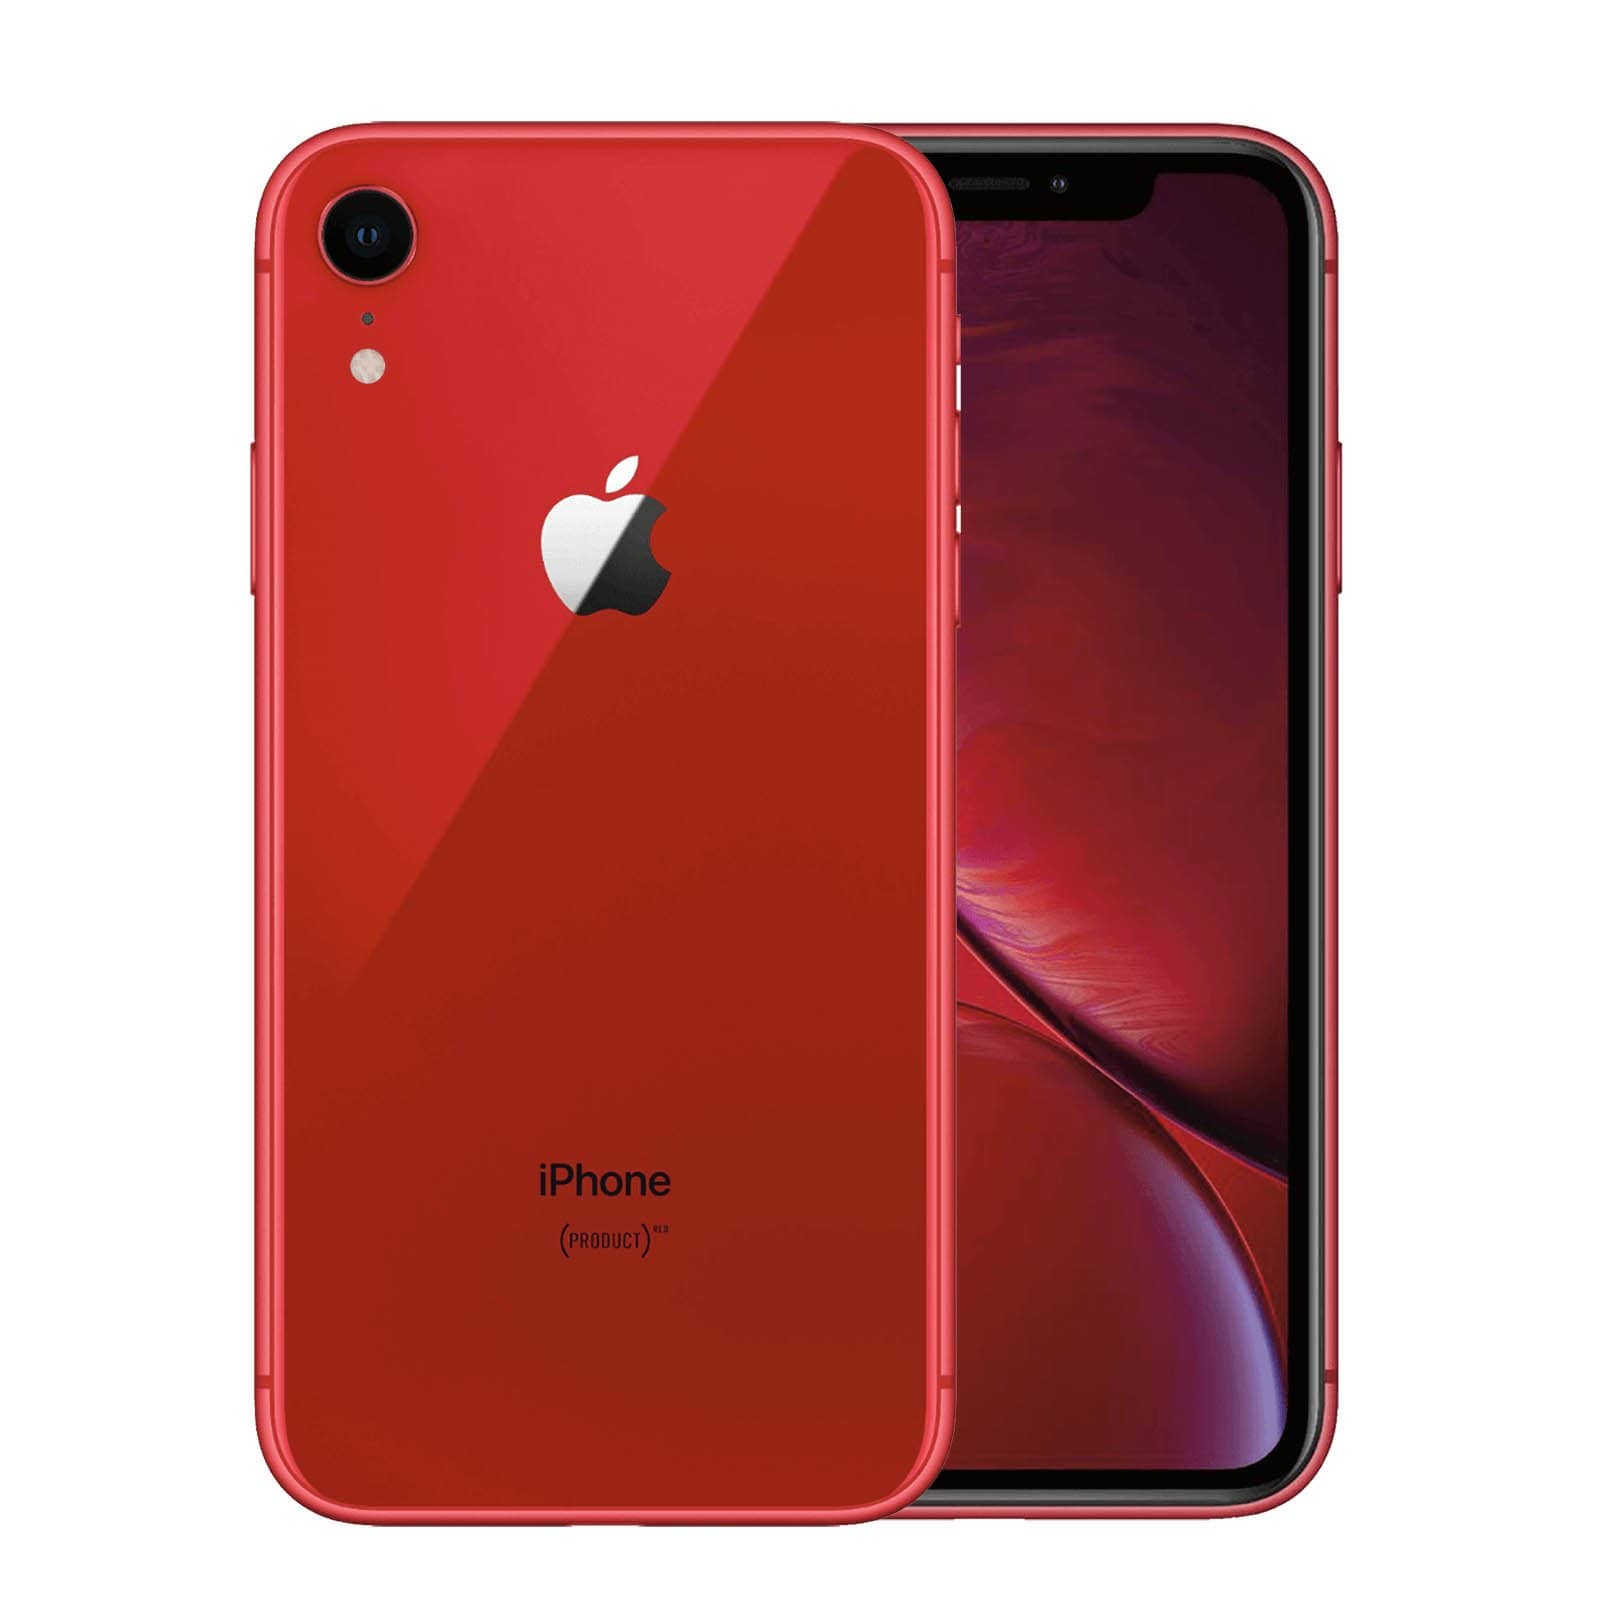 Apple iPhone XR 128GB Product Red Very Good - Unlocked